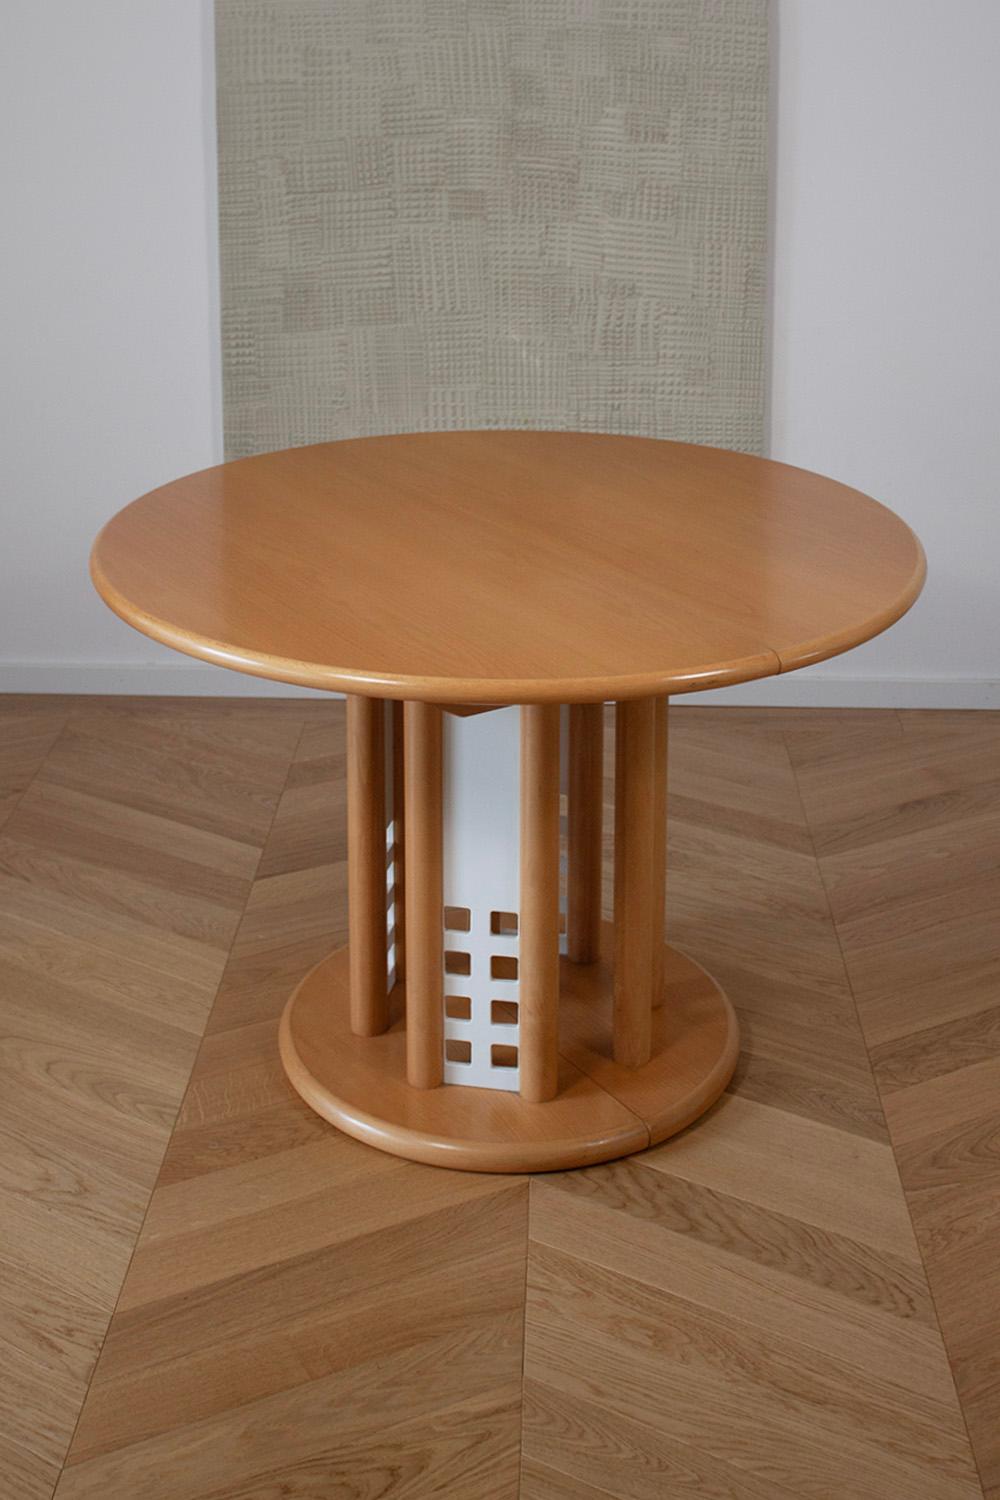 Shipping Note: If your region or country is not listed under the shipping options, please contact us directly.

This very rare extendable Thonet table is a classic 1990 Design. The Table is made from beech wood and has 4 interesting white metal